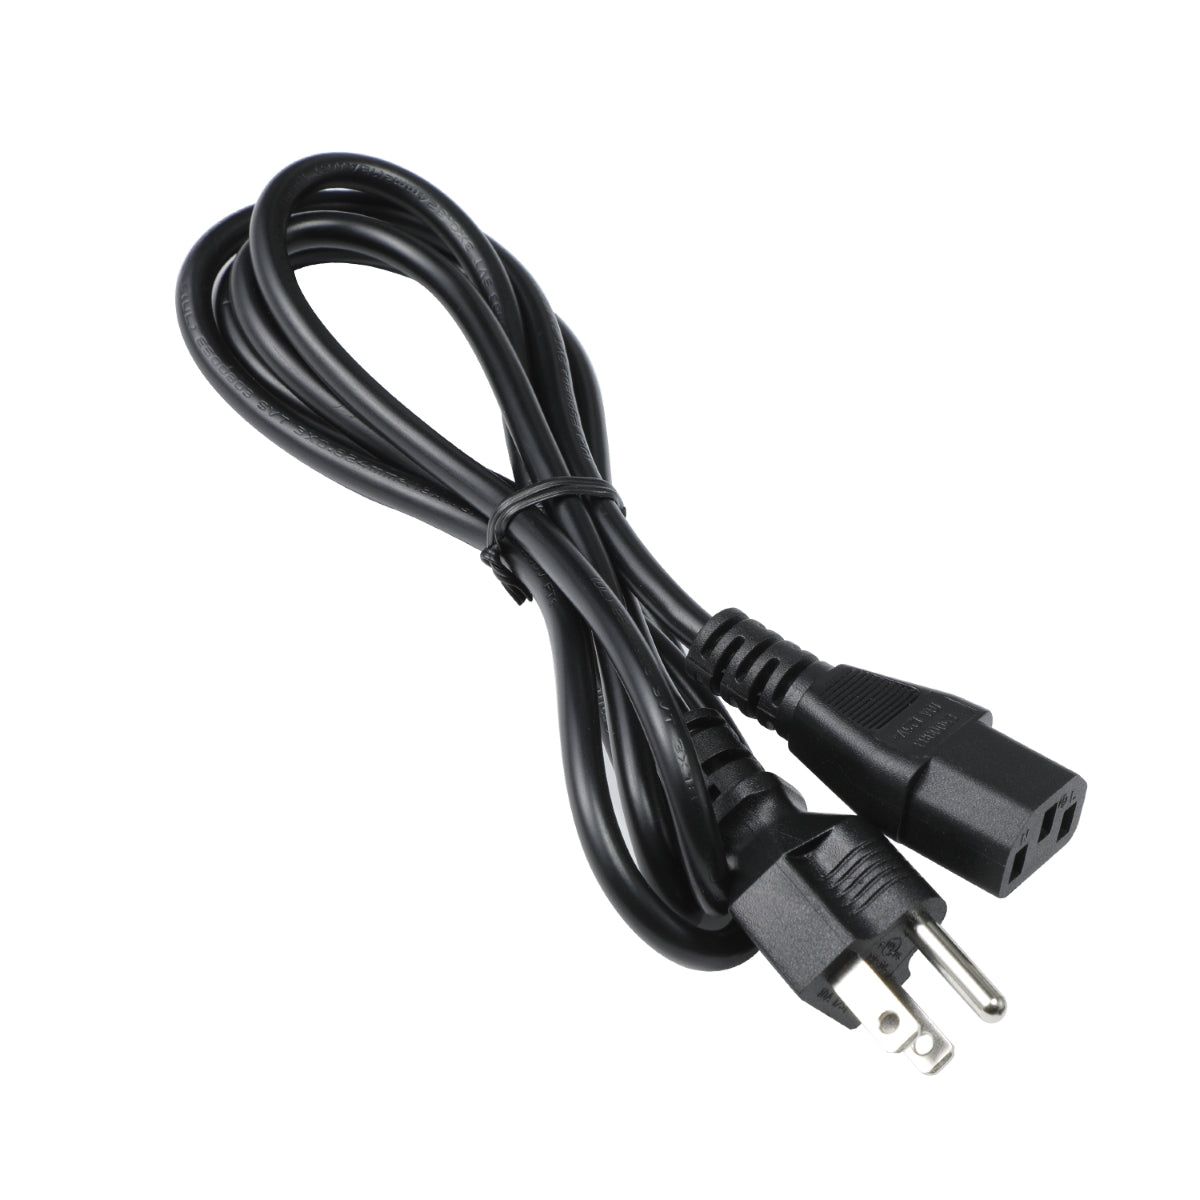 Power Cable for Philips 241B7QPJKEB Monitor.